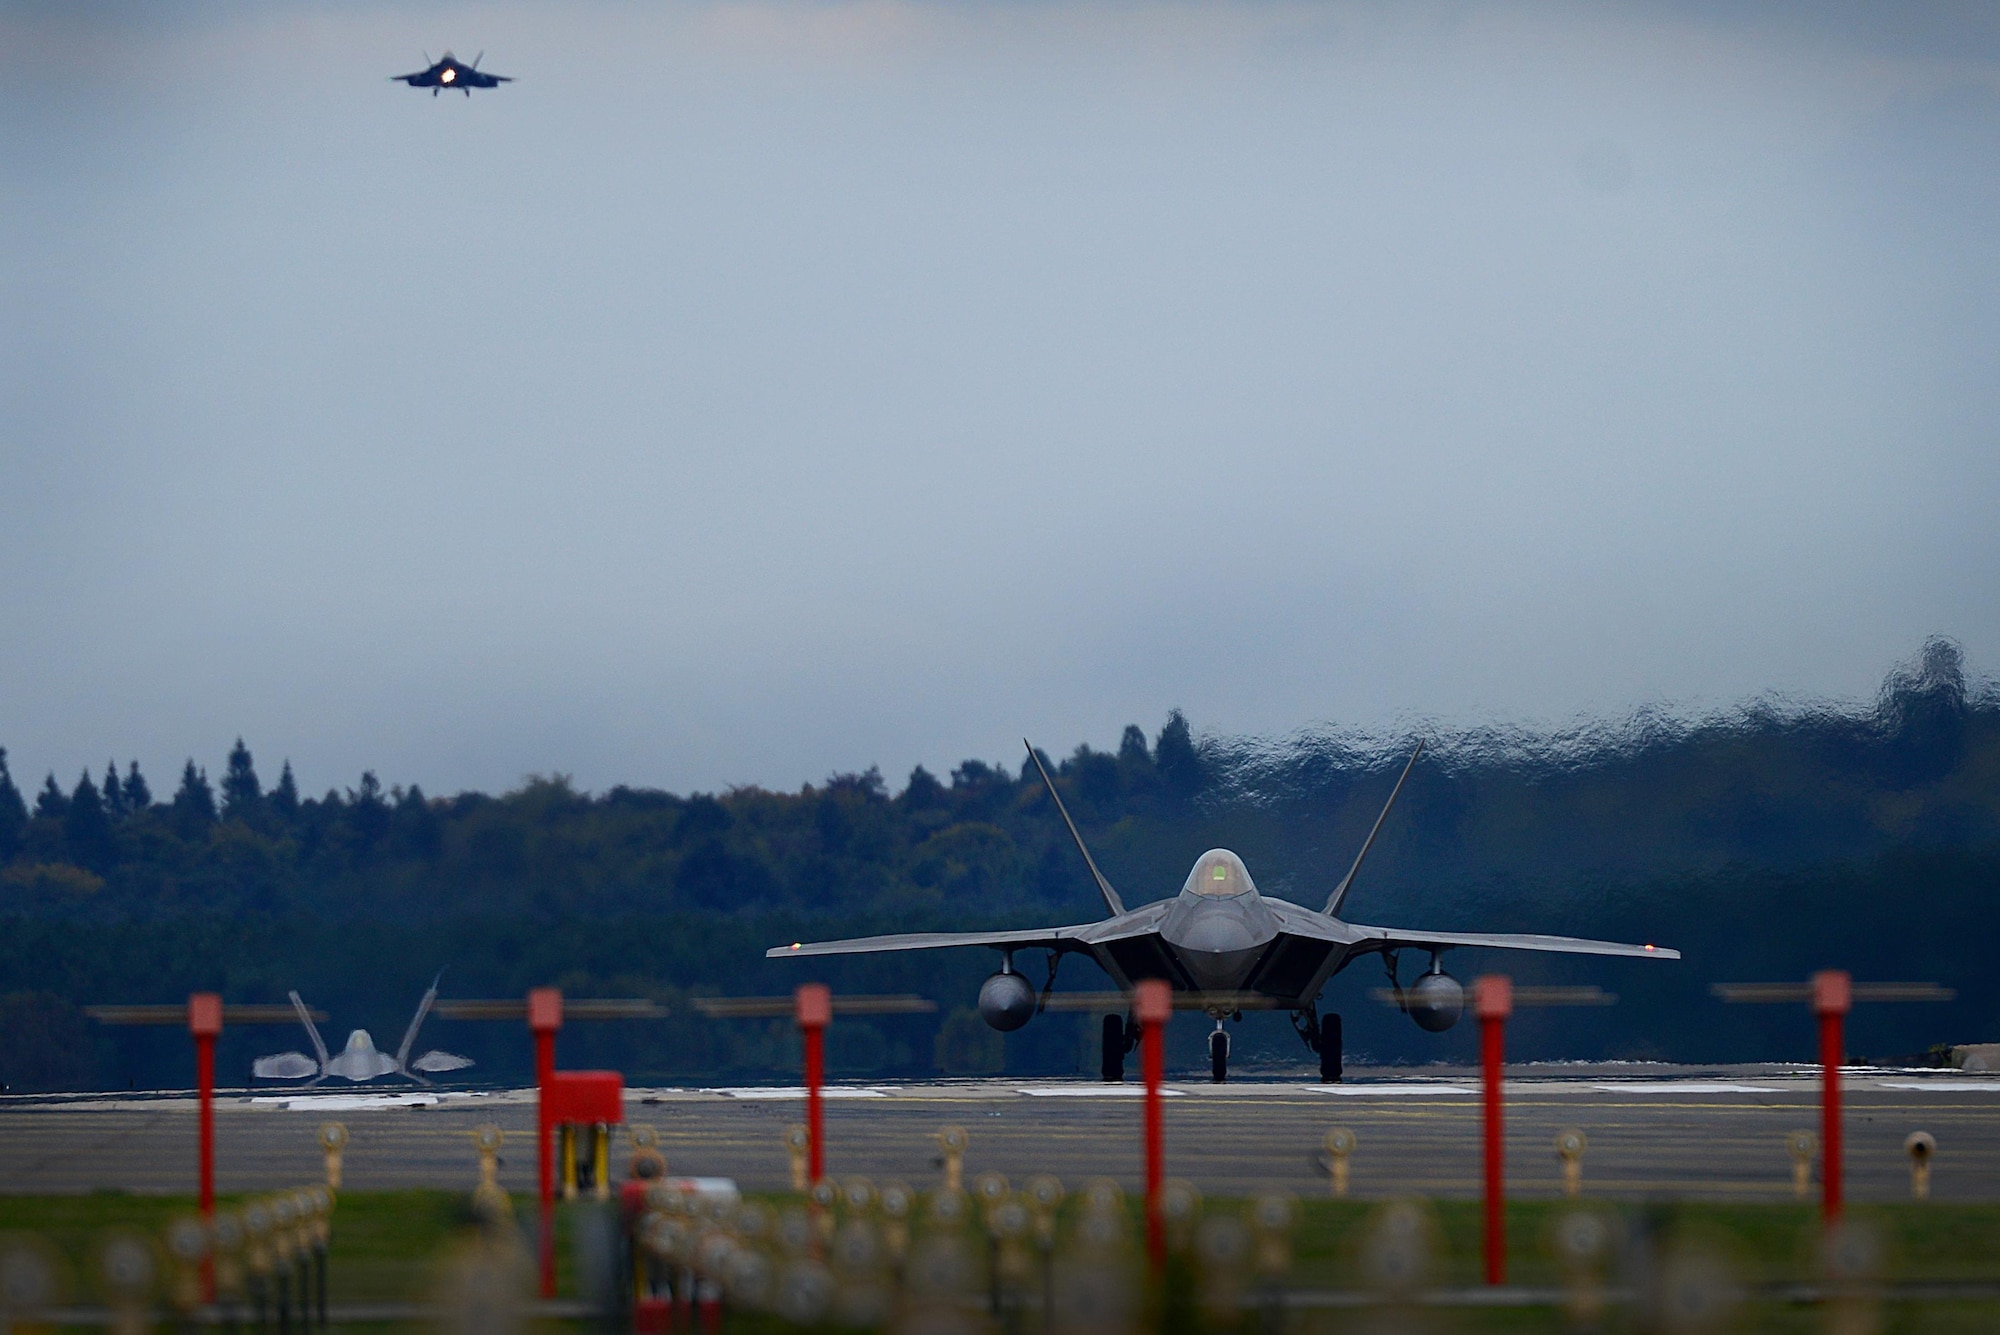 F-22 Raptors from the 1st Fighter Wing, Joint Base Langley-Eustis, Virginia arrive at Royal Air Force Lakenheath, England Oct. 8, 2017. This flying training deployment is an opportunity for the F-22s to fly alongside Europe-based U.S. and allied air force aircraft in a realistic training environment. (U.S. Air Force photo/Tech. Sgt. Matthew Plew)